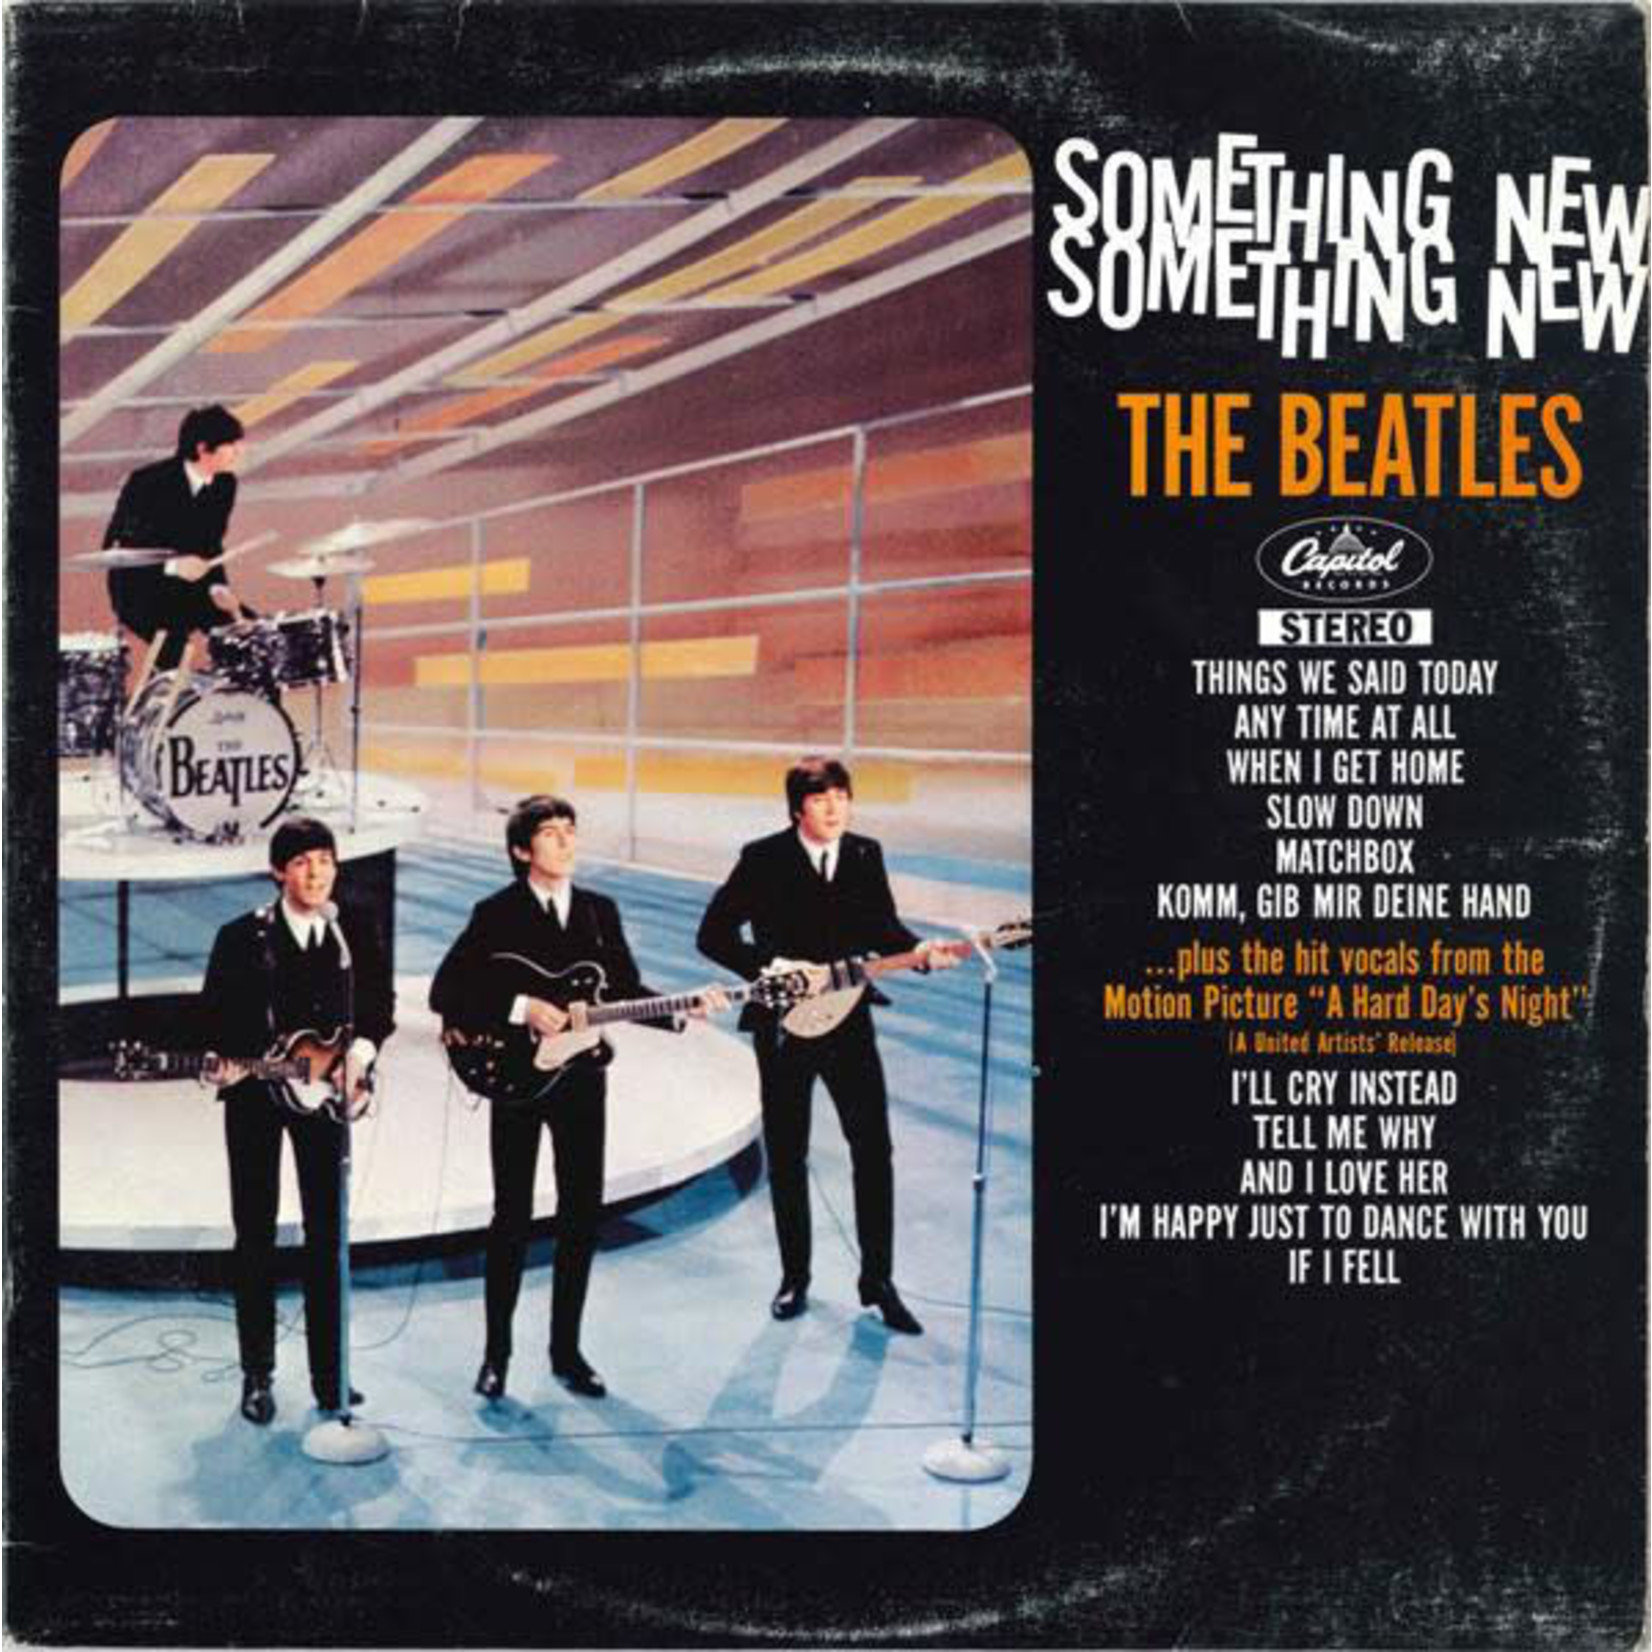 The Beatles The Beatles – Something New (VG, 1972, LP, Reissue, Stereo, Capitol Records – ST-2108, Canada)